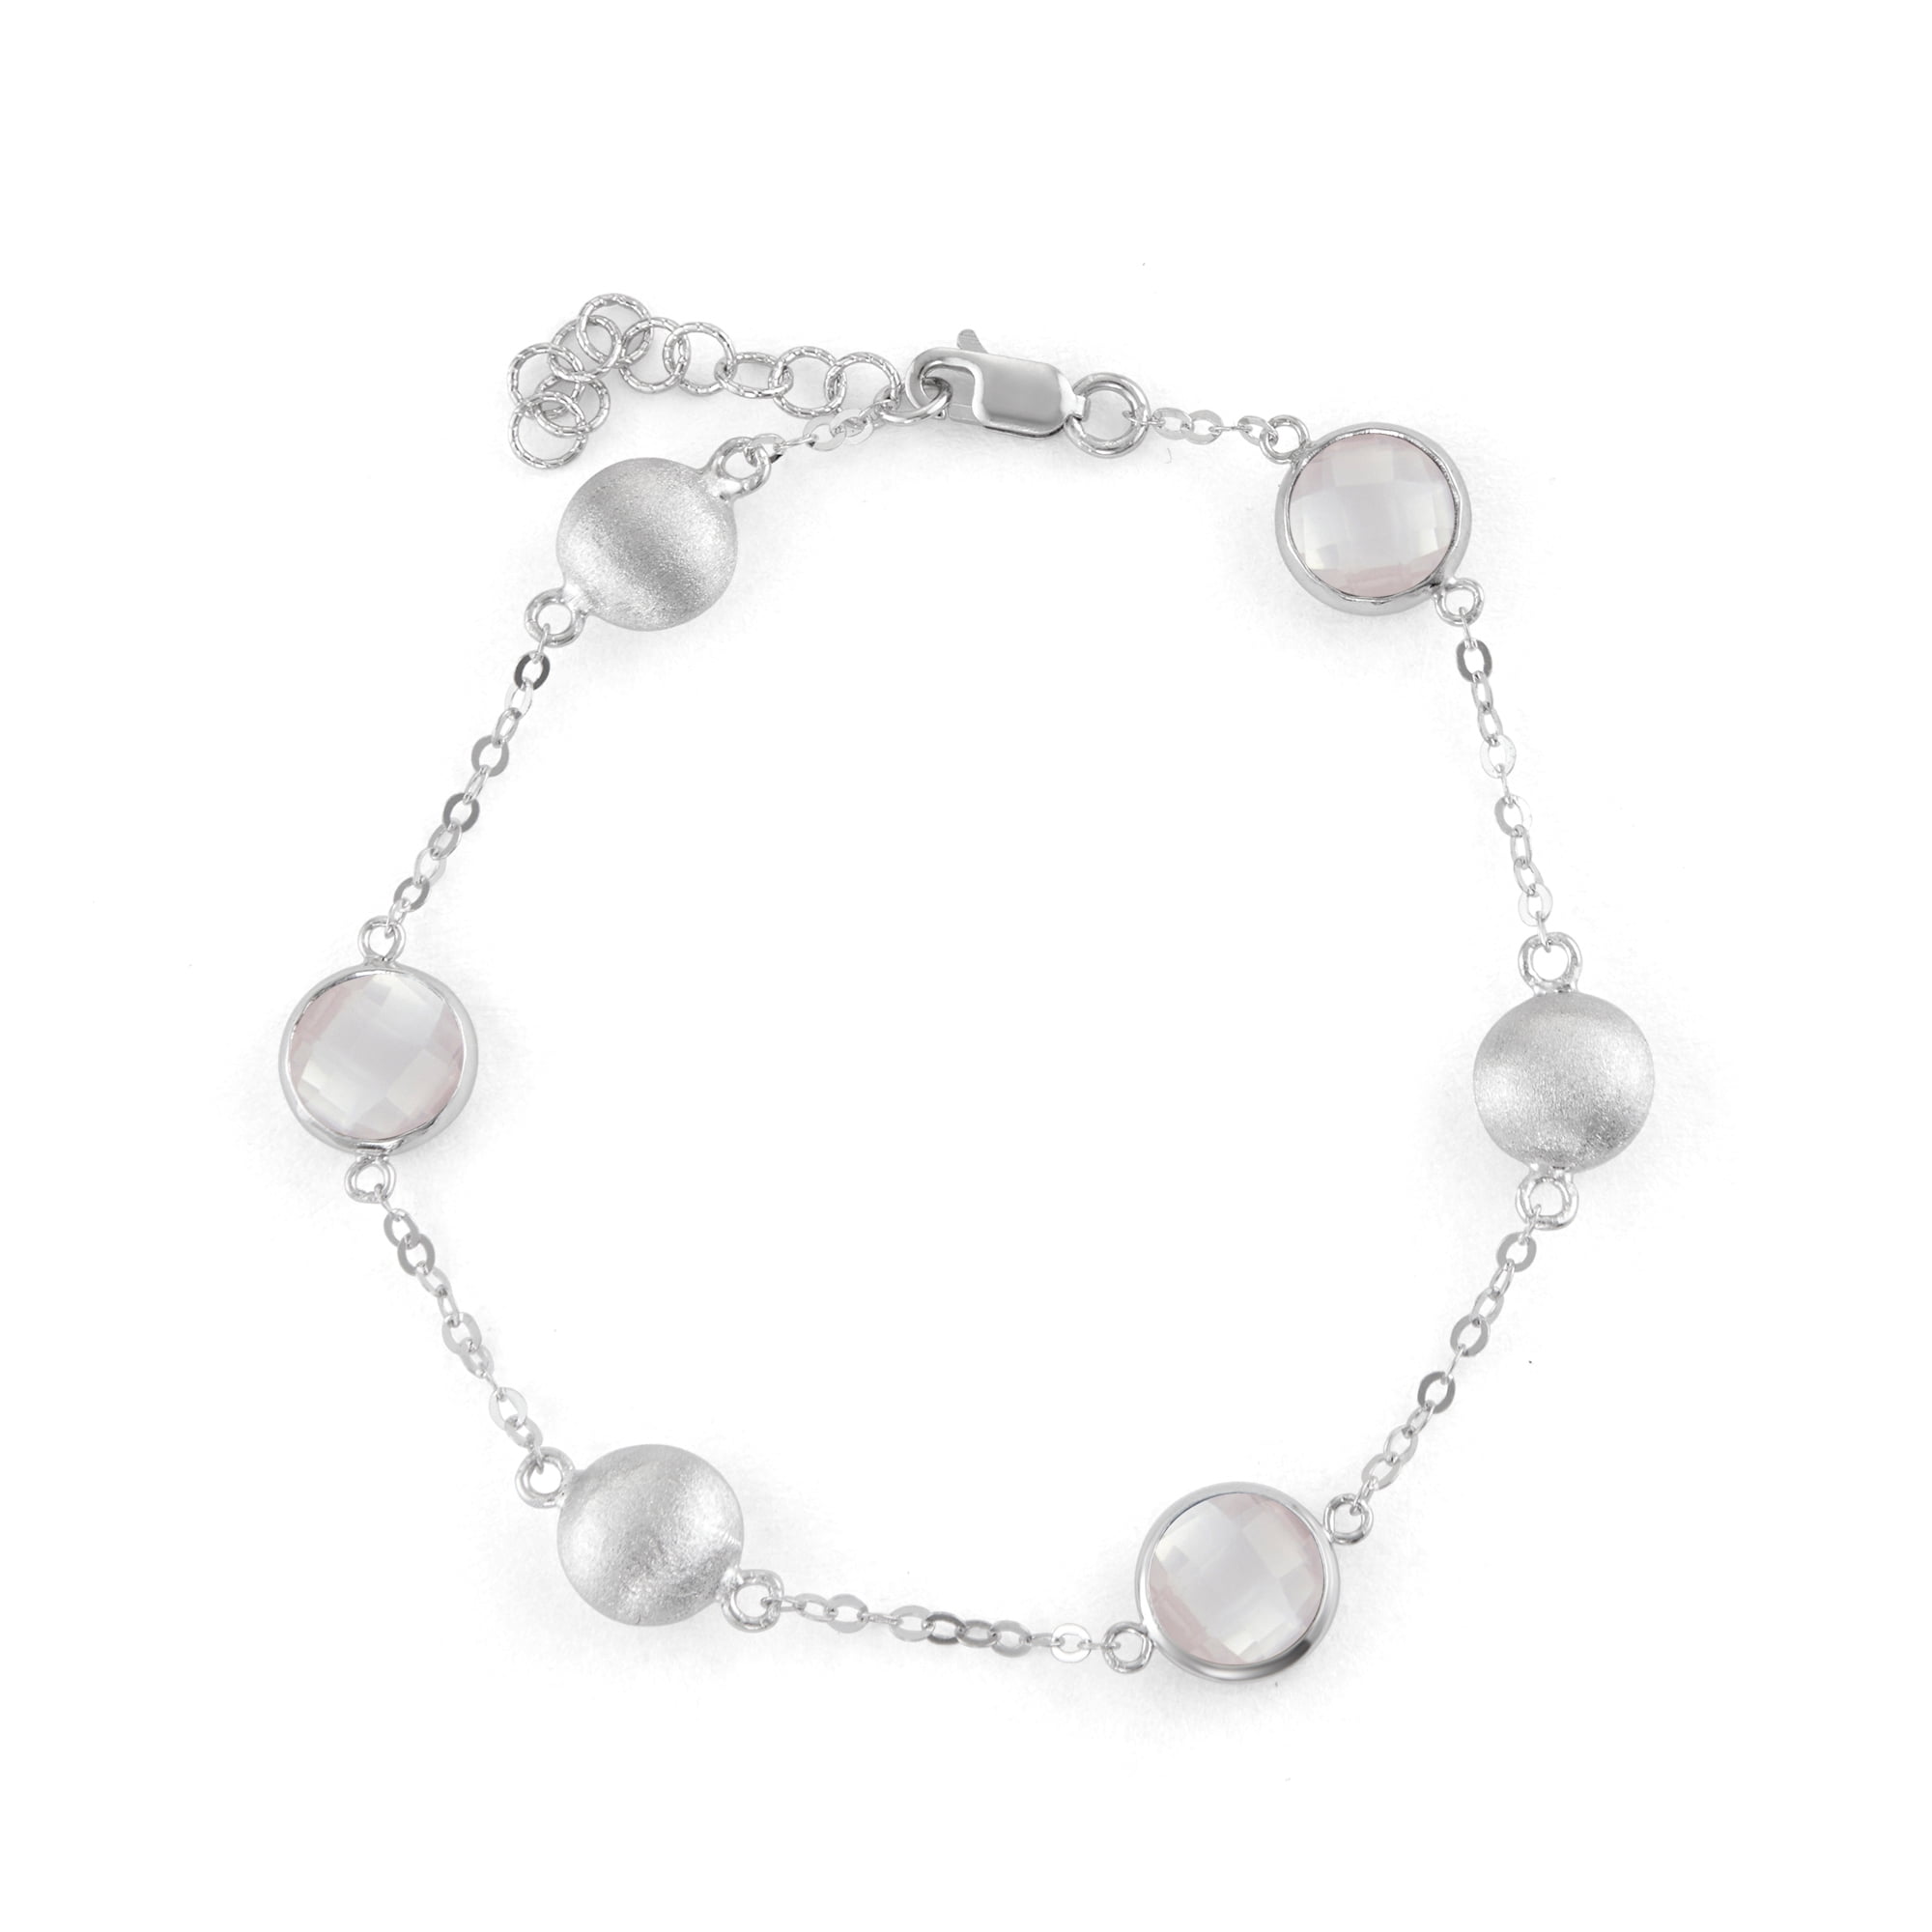 5th & Main Sterling Silver Bead and Bezel Bracelet with Rose Quartz ...